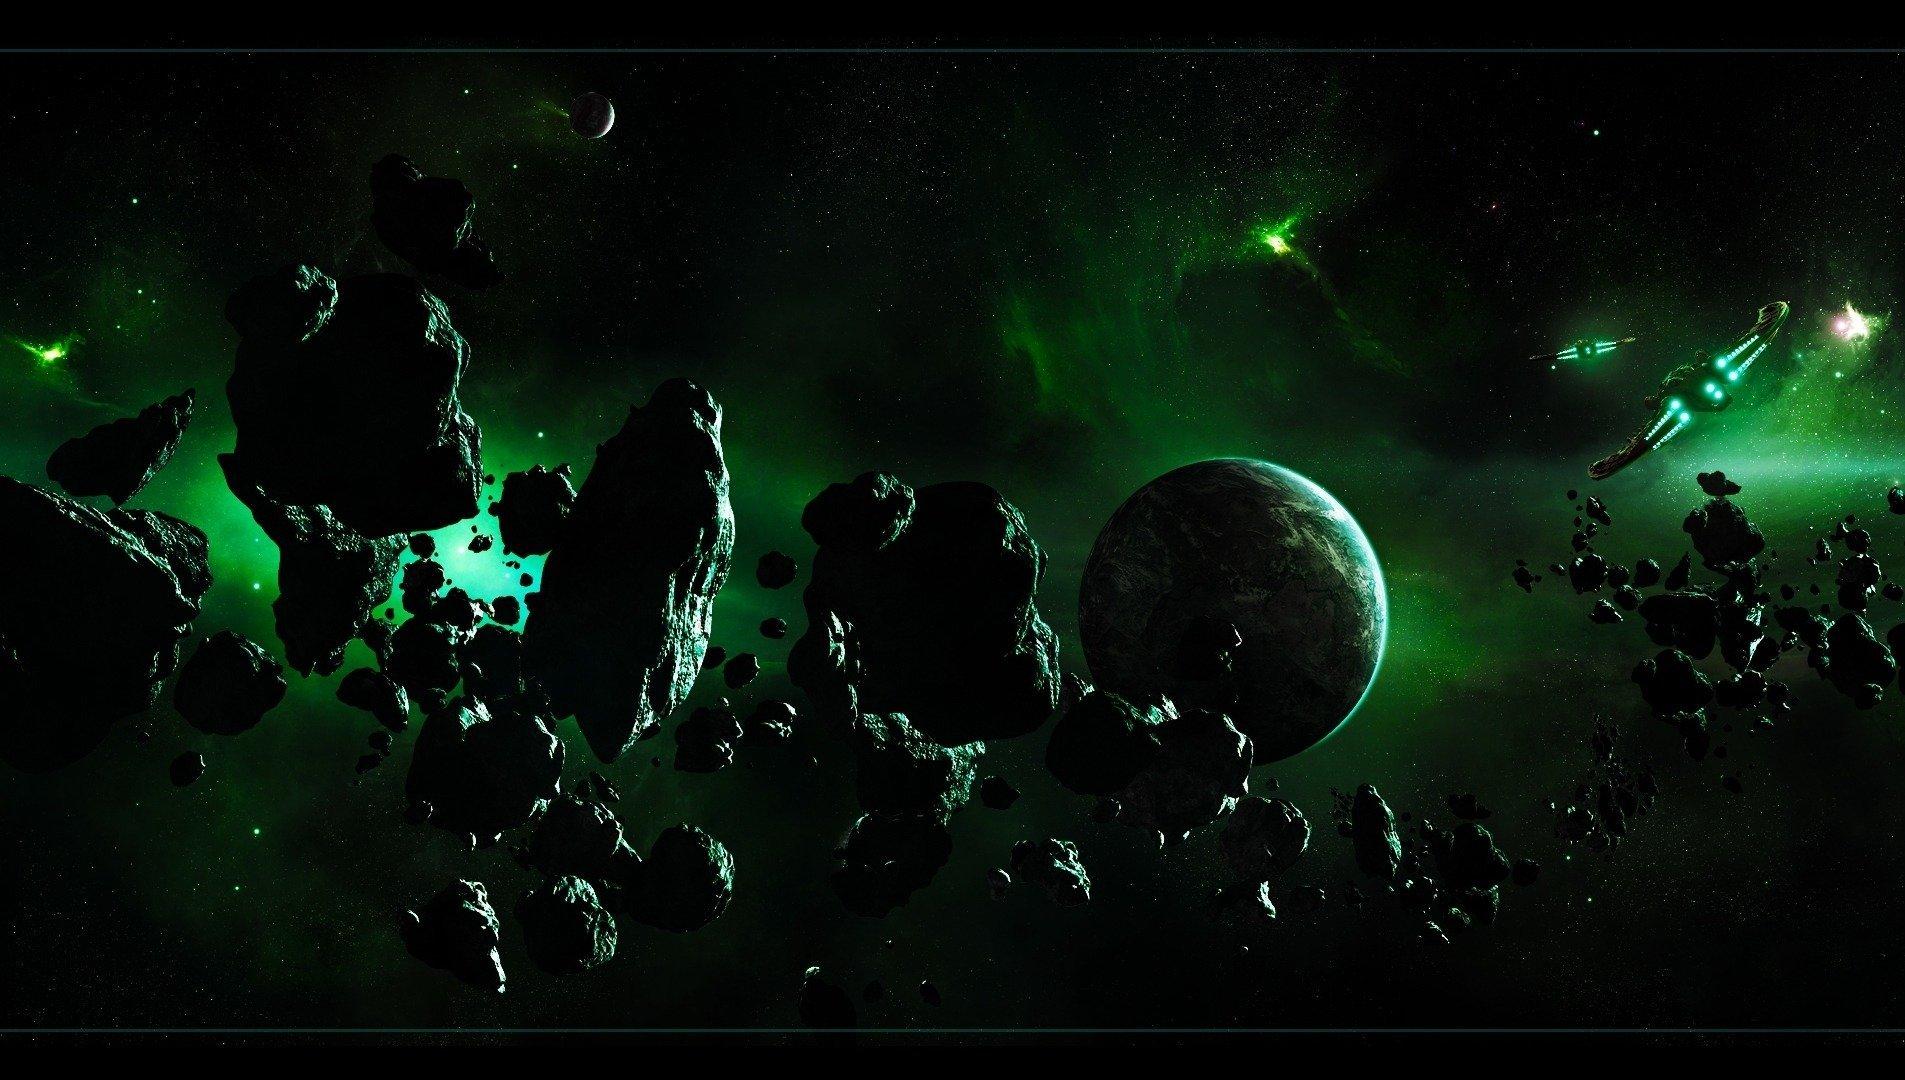 mars and asteroid belt wallpaper